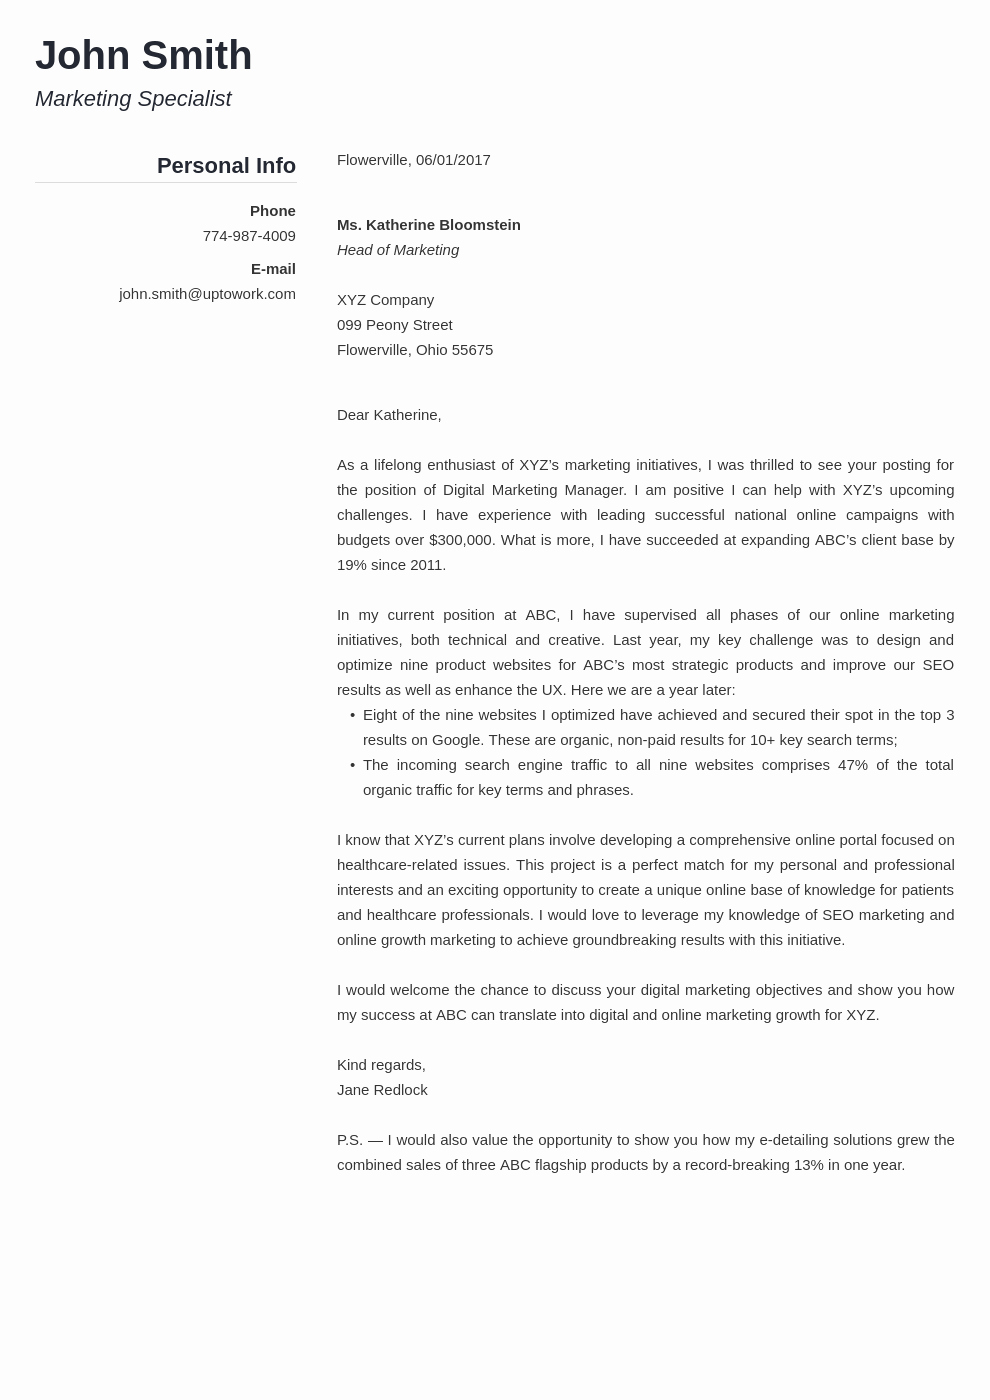 Resume Cover Letter Template Free Best Of Cover Letter for Resume Cover Leter Best Resume format